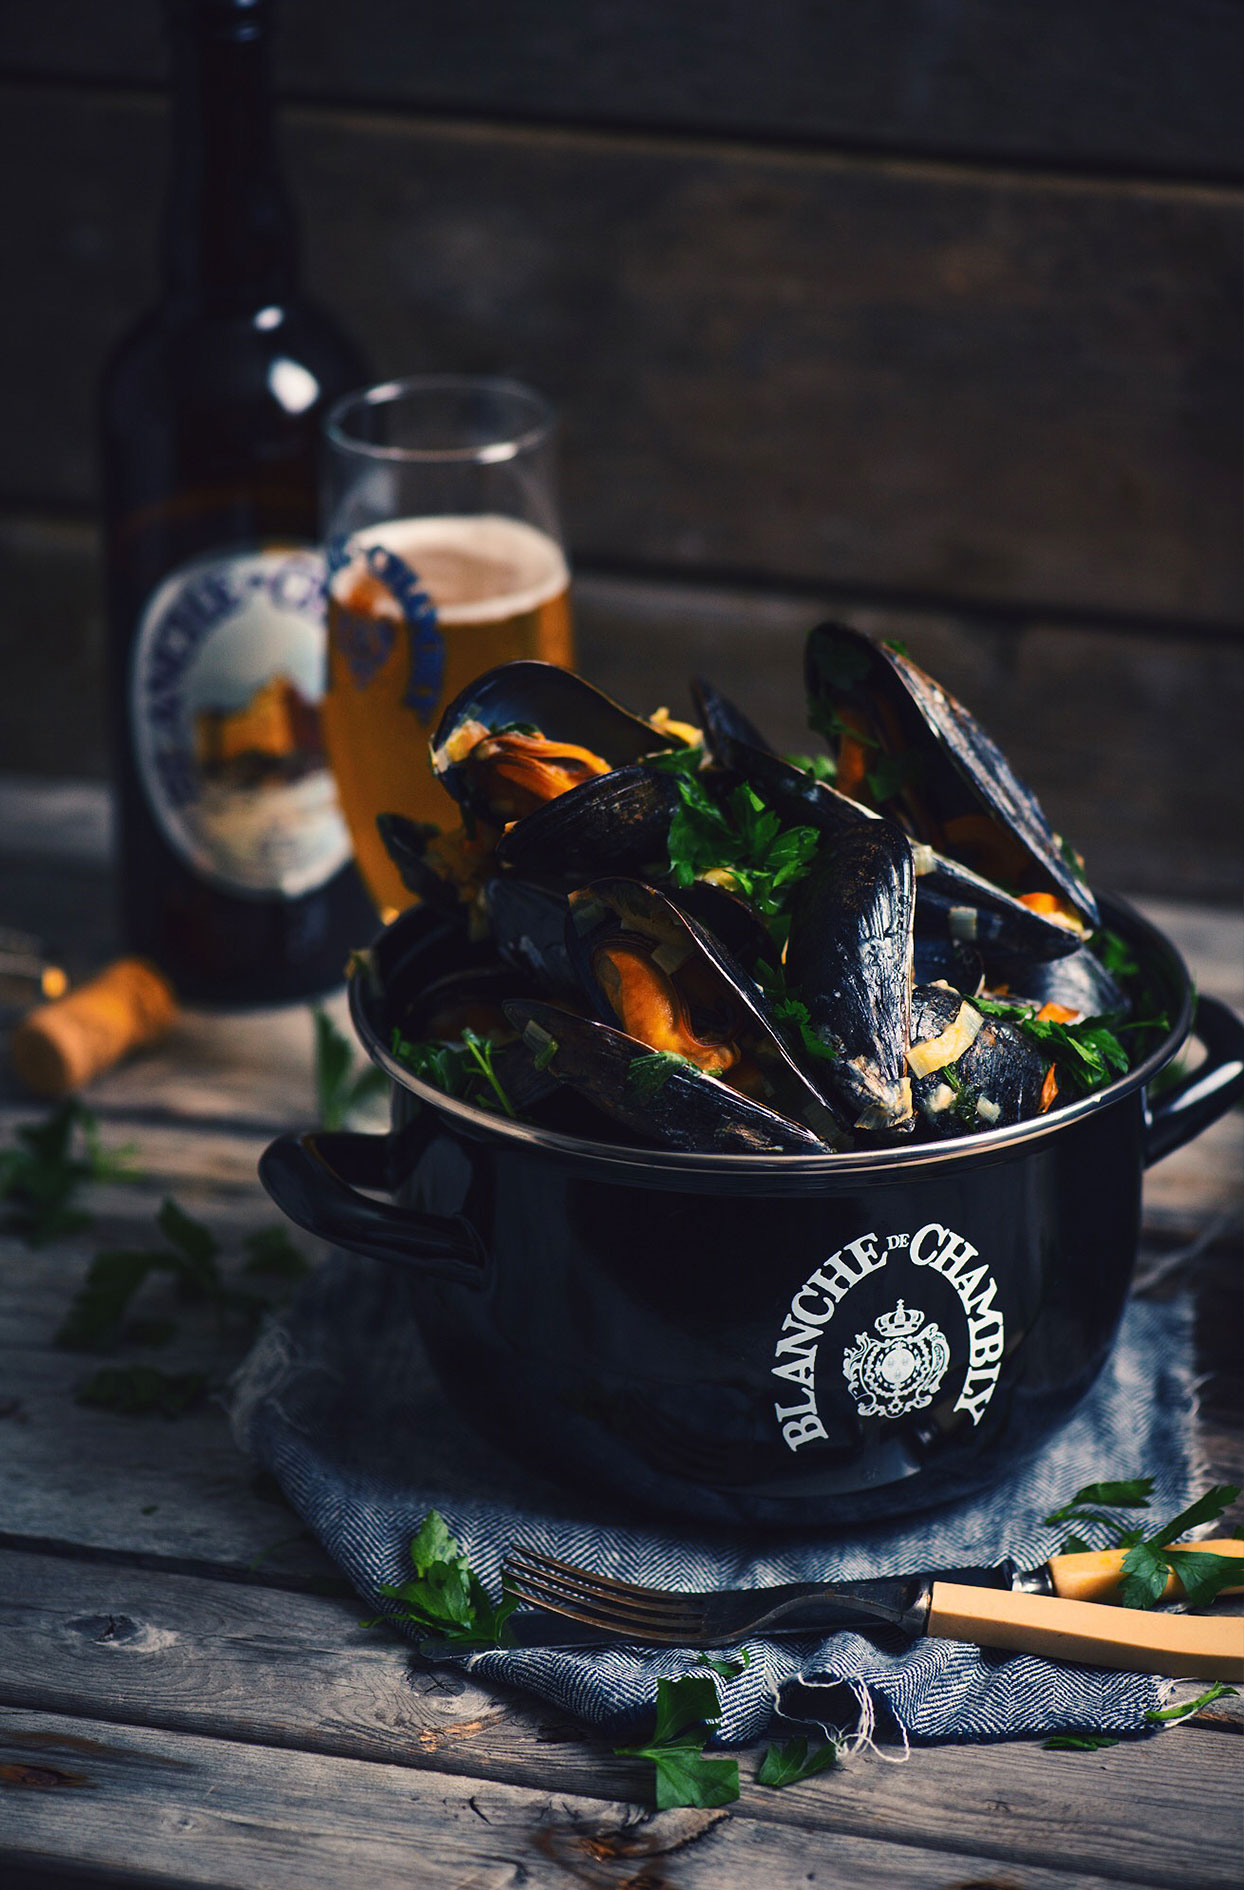 Mussels with leeks, white wine and Blanche de Chambly beer